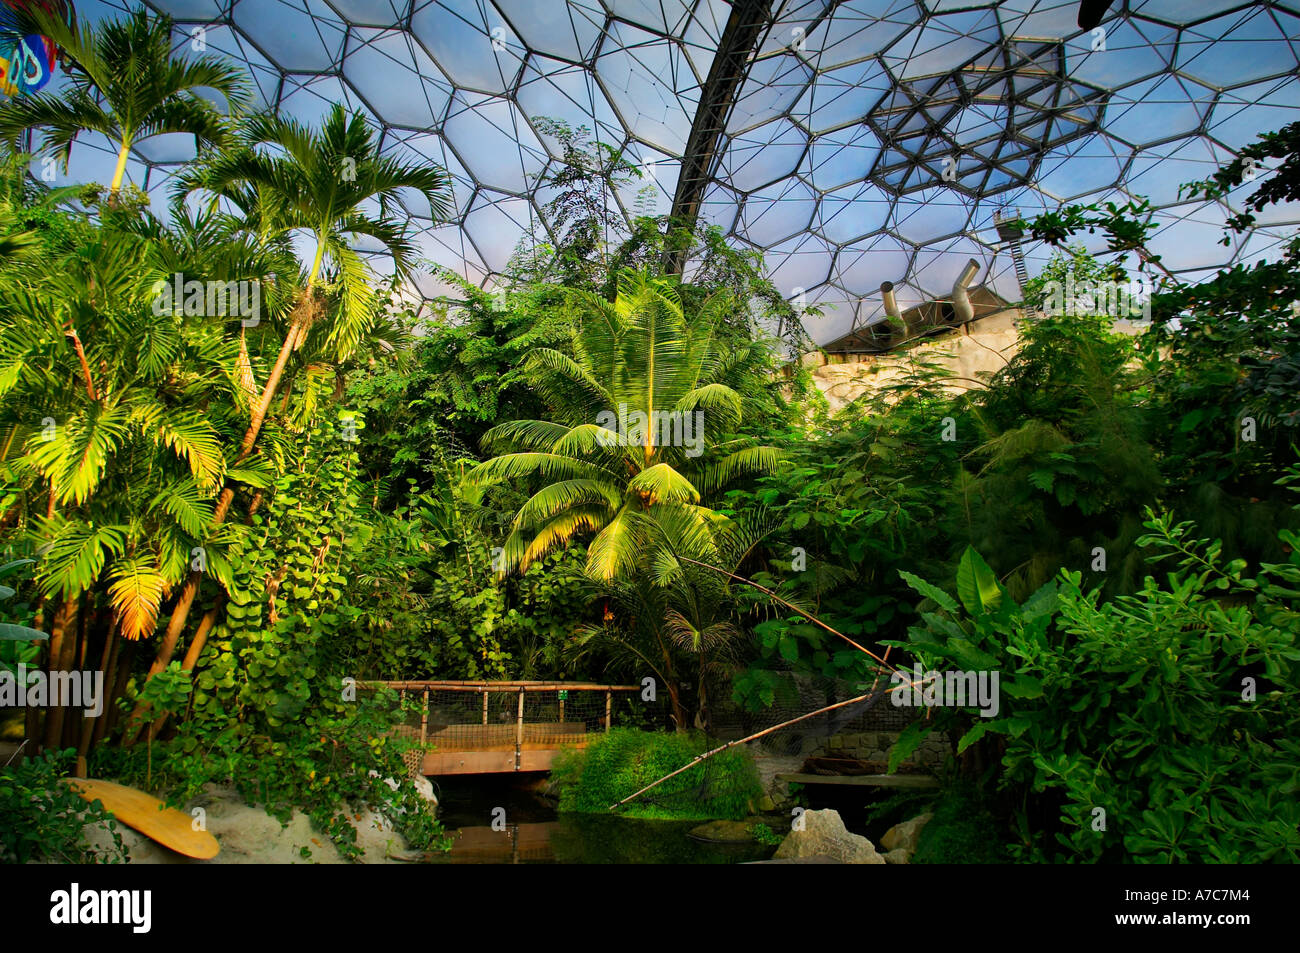 The humid tropics biome at the Eden Project at Bodelva, near St.Austell in Cornwall, UK. Stock Photo